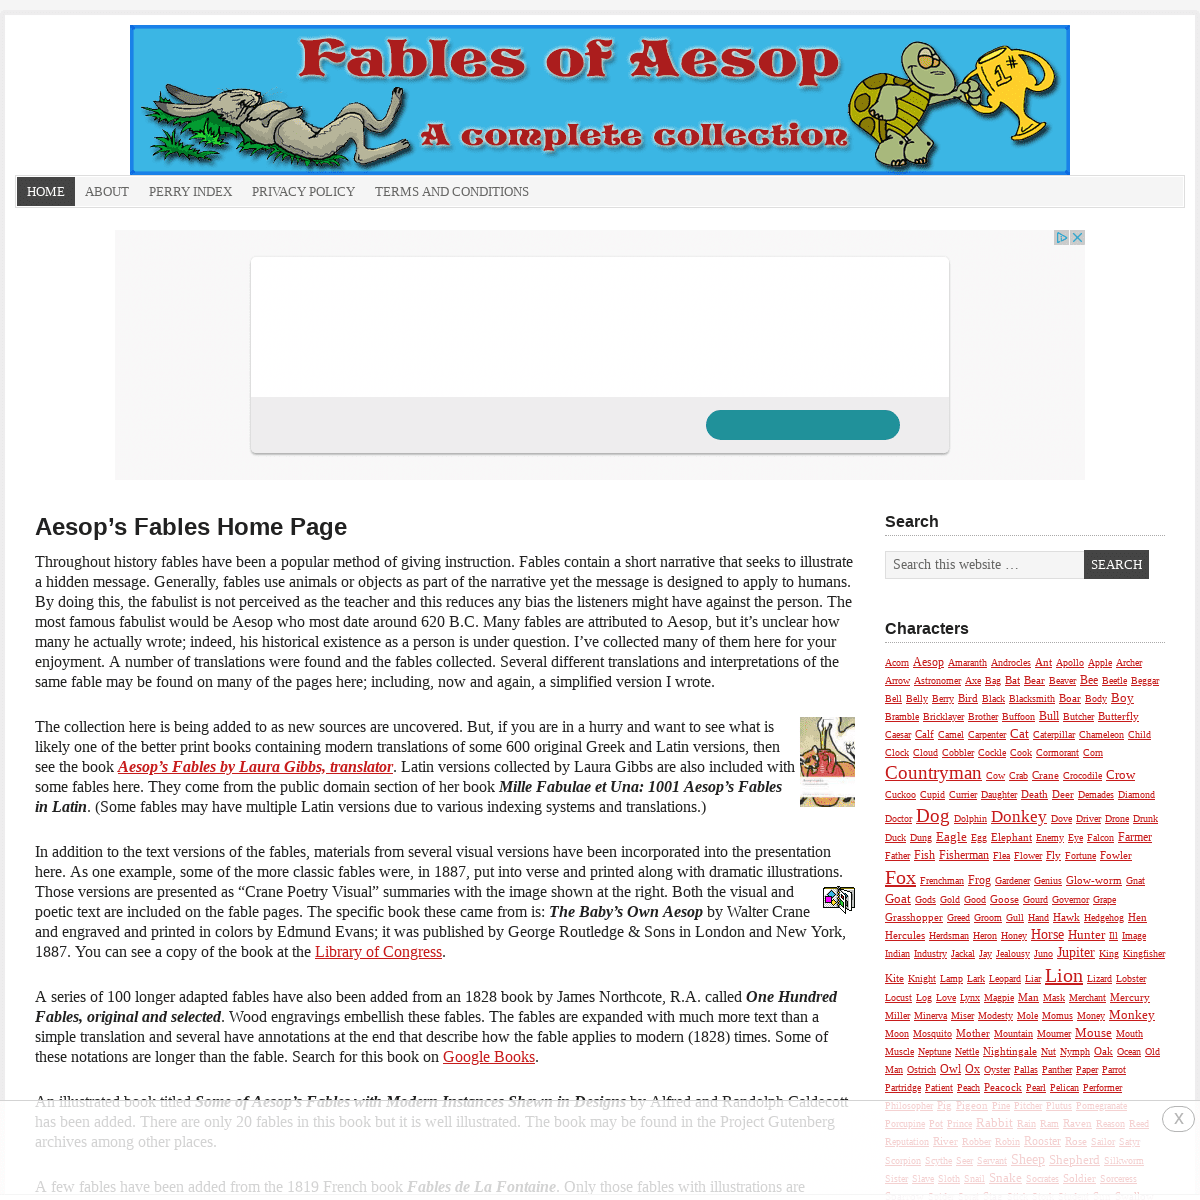 Aesop's Fables Home Page - Fables of Aesop